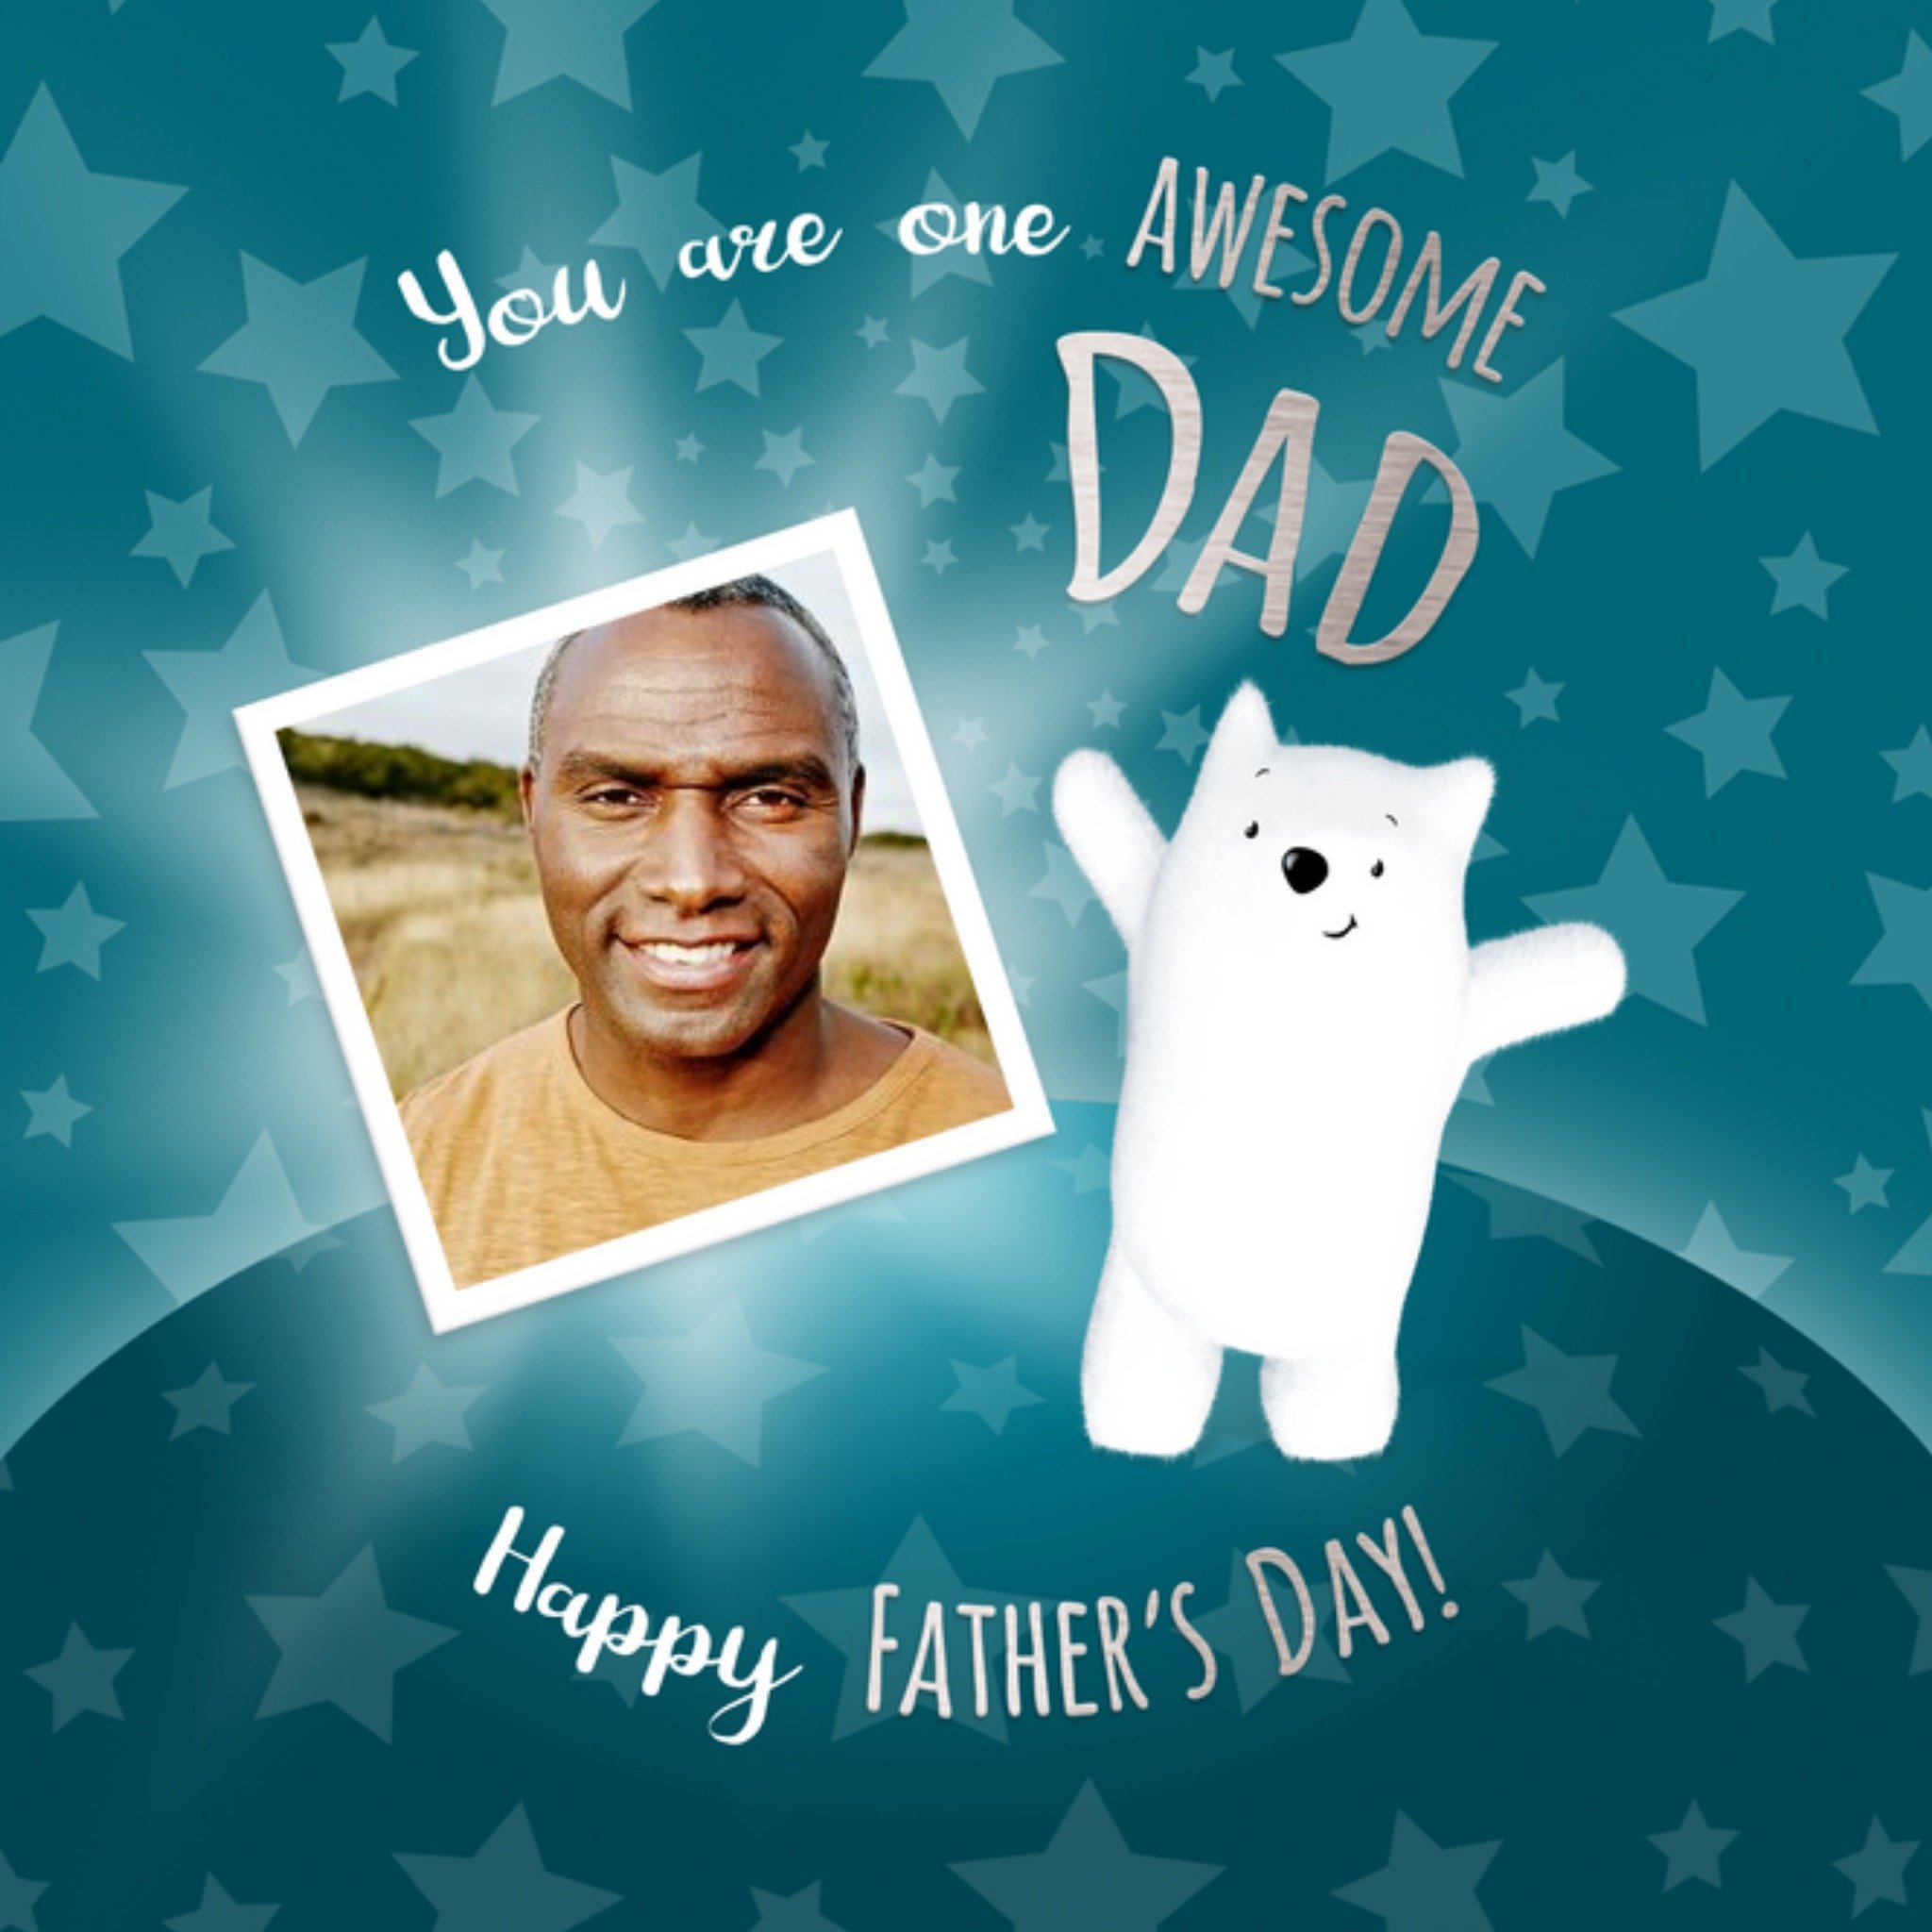 Moonpig Cute Bear You Are Awesome Dad Photo Upload Father's Day Card, Square